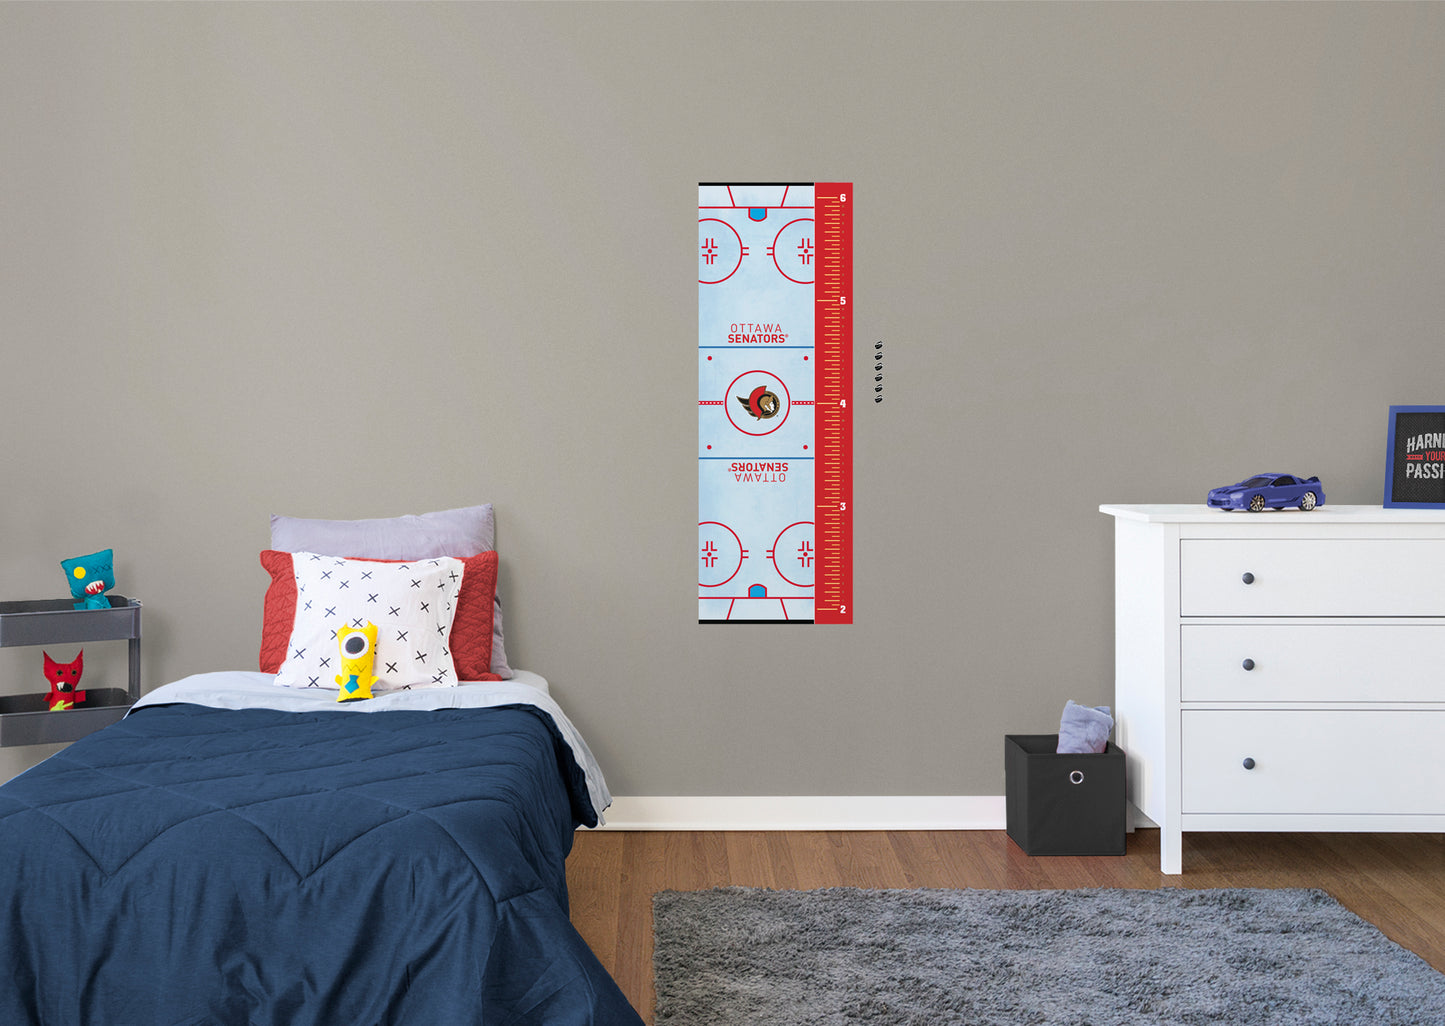 Ottawa Senators 2020 Rink Growth Chart  - Officially Licensed NHL Removable Wall Decal